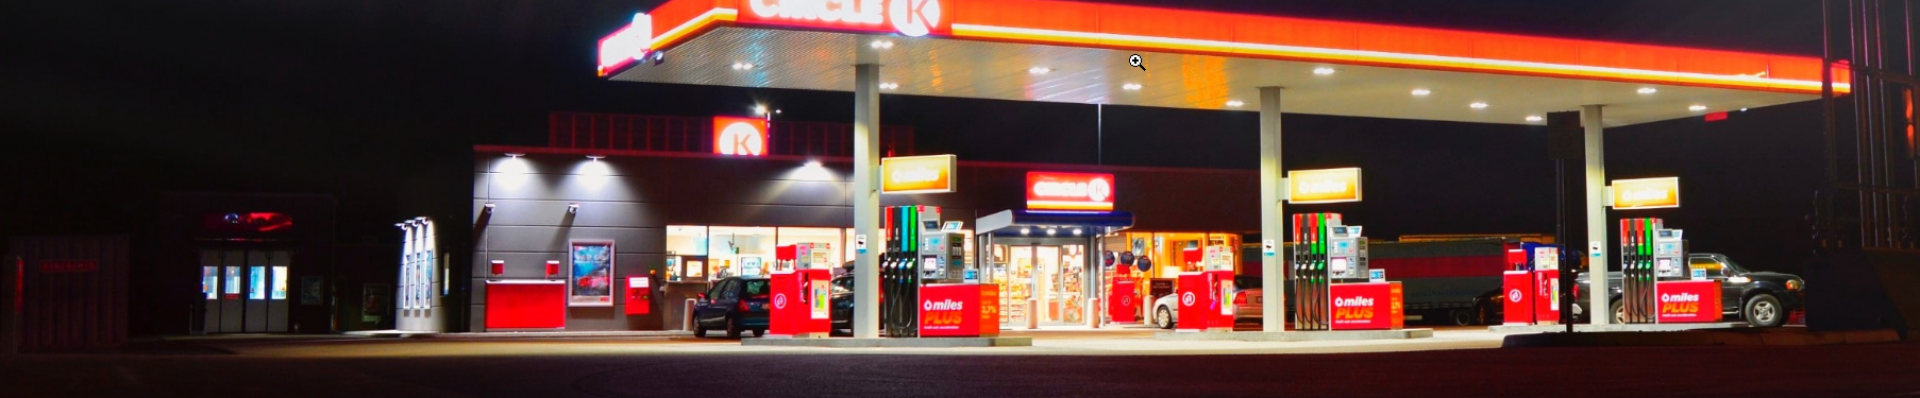 We provide a network of refuelling stations, offering fuels and additional amenities to both private and business customers.